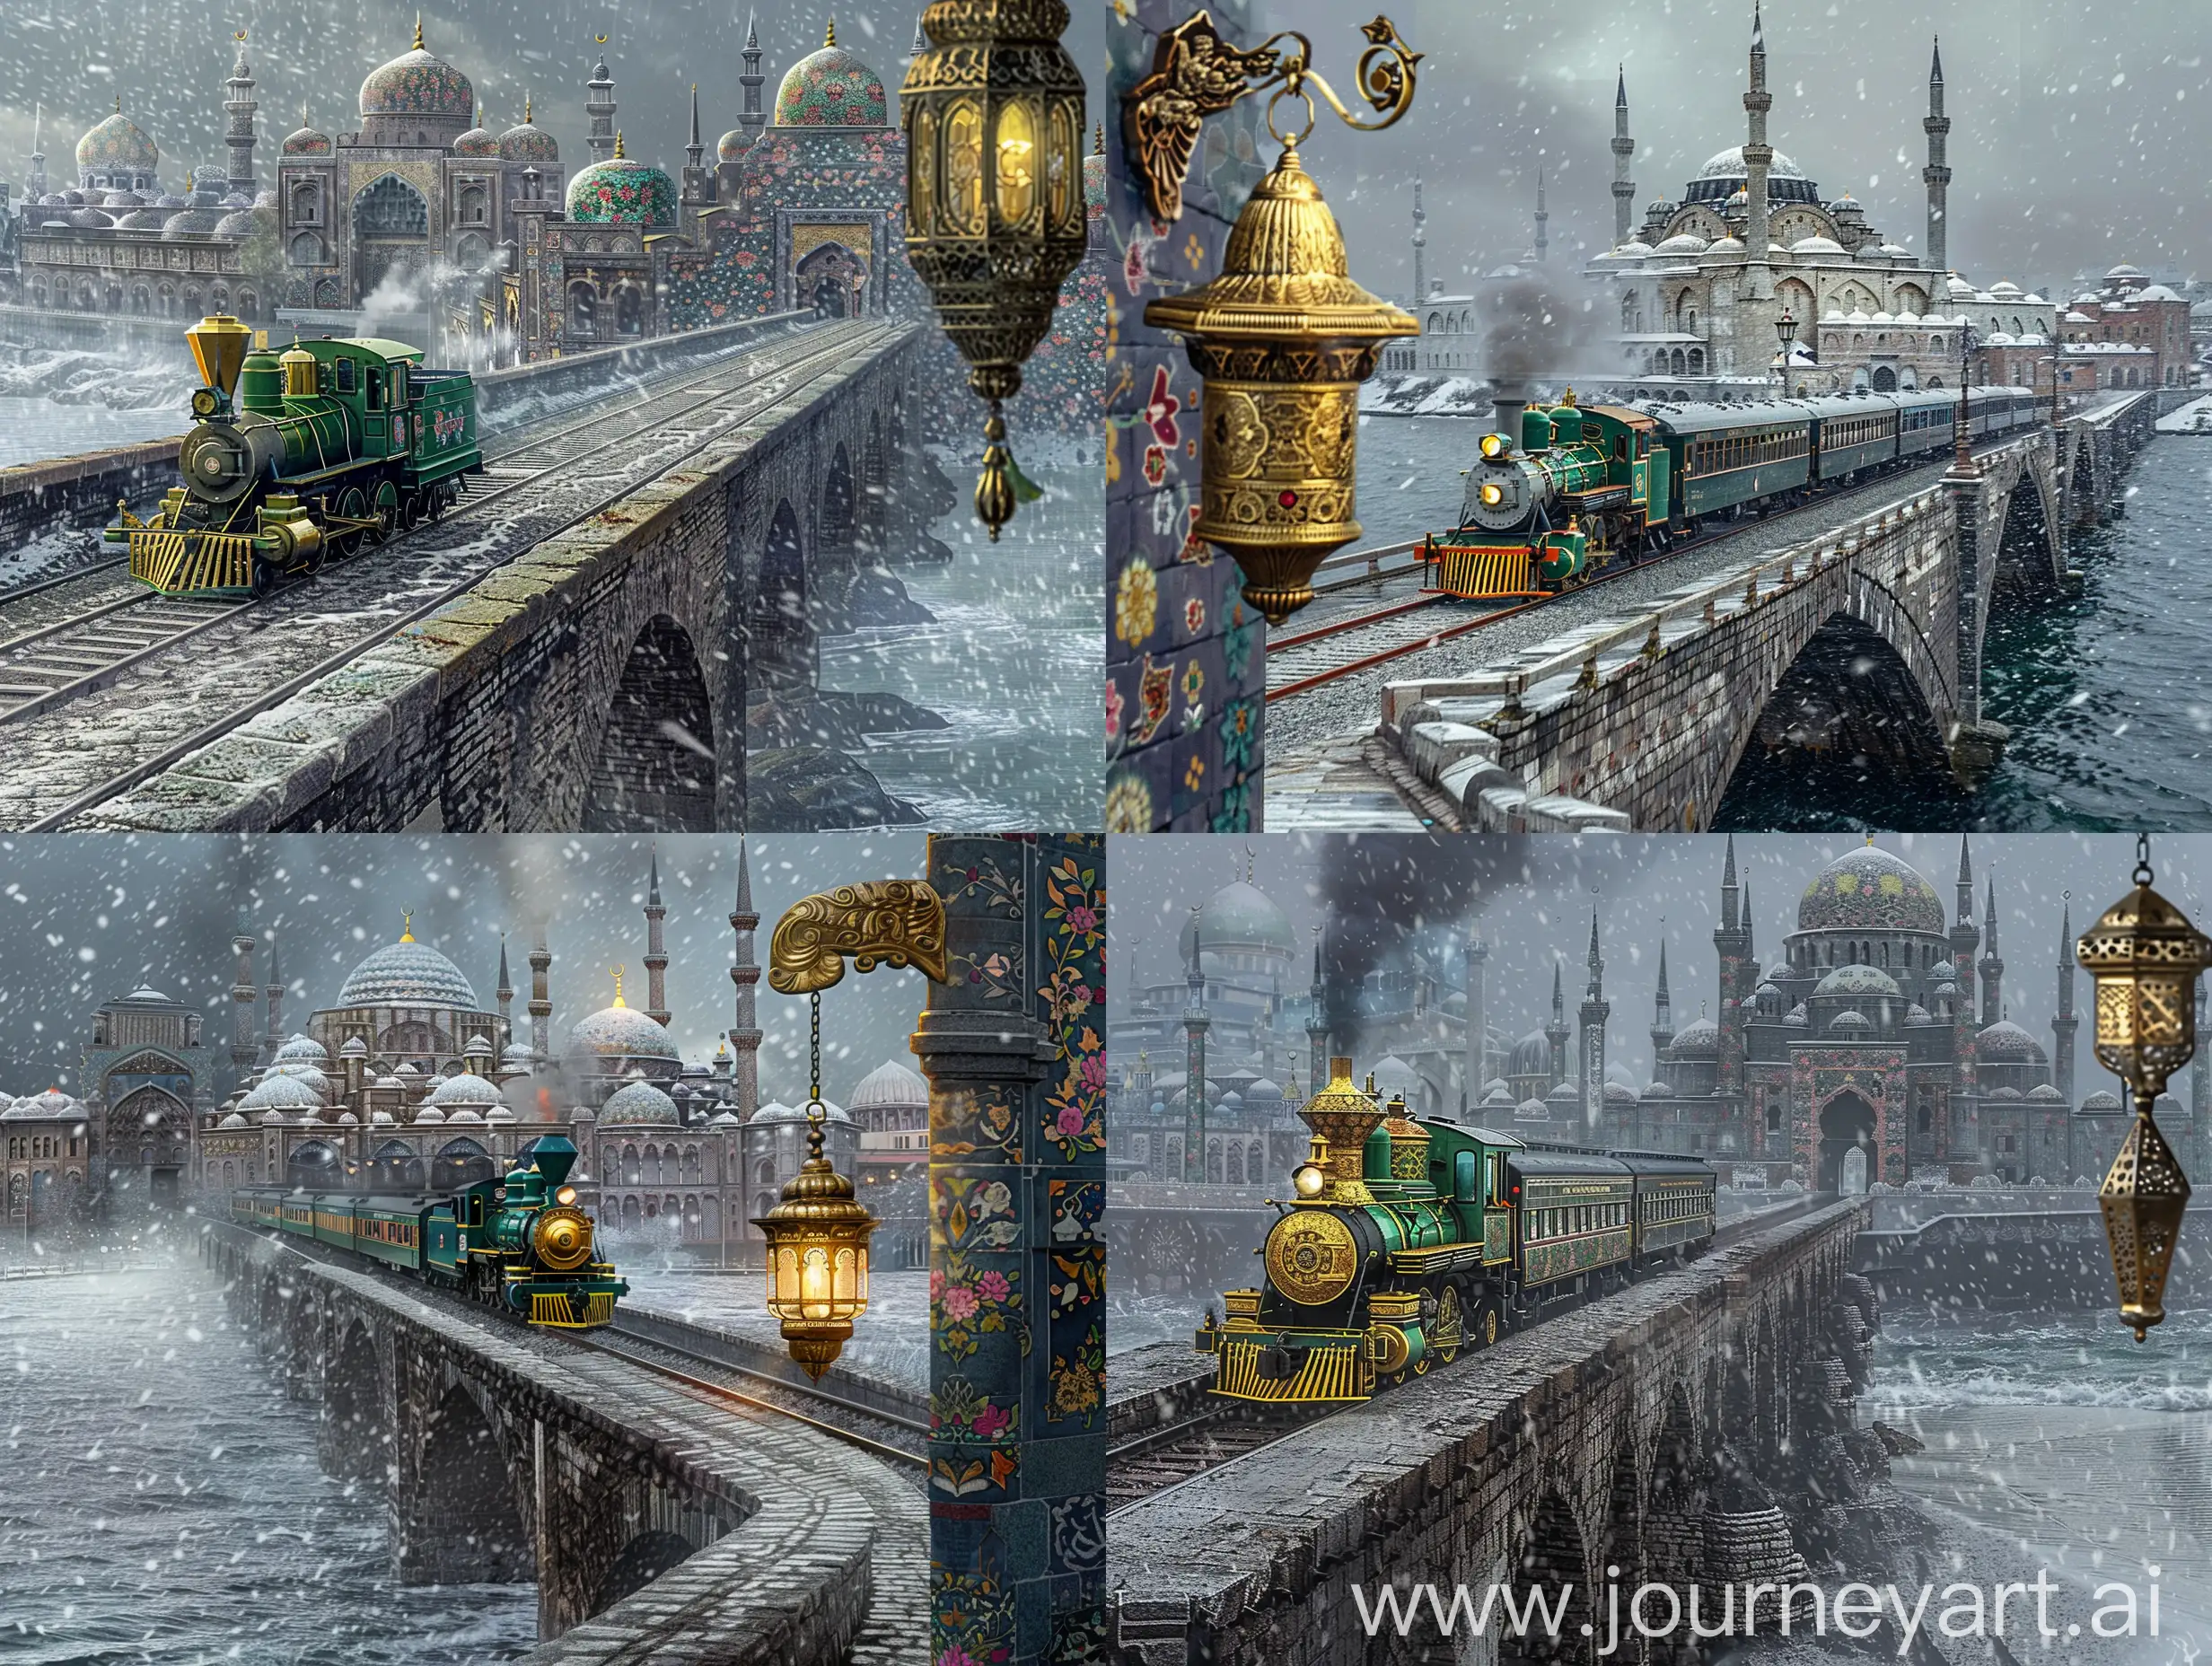 Cinematic photo: A stonebridge going towards into a seafront city, a green golden steam engine train moving on the bridge towards the middle of city, in the background is the wide seafront city of floral Persian tiled mosques and timurid persian islamic architectures all having floral persian tile exterior and gold ornaments, dark grey dramatic weather, snowfall, a glorious islamic lamp hanging on side of the image --ar 4:3